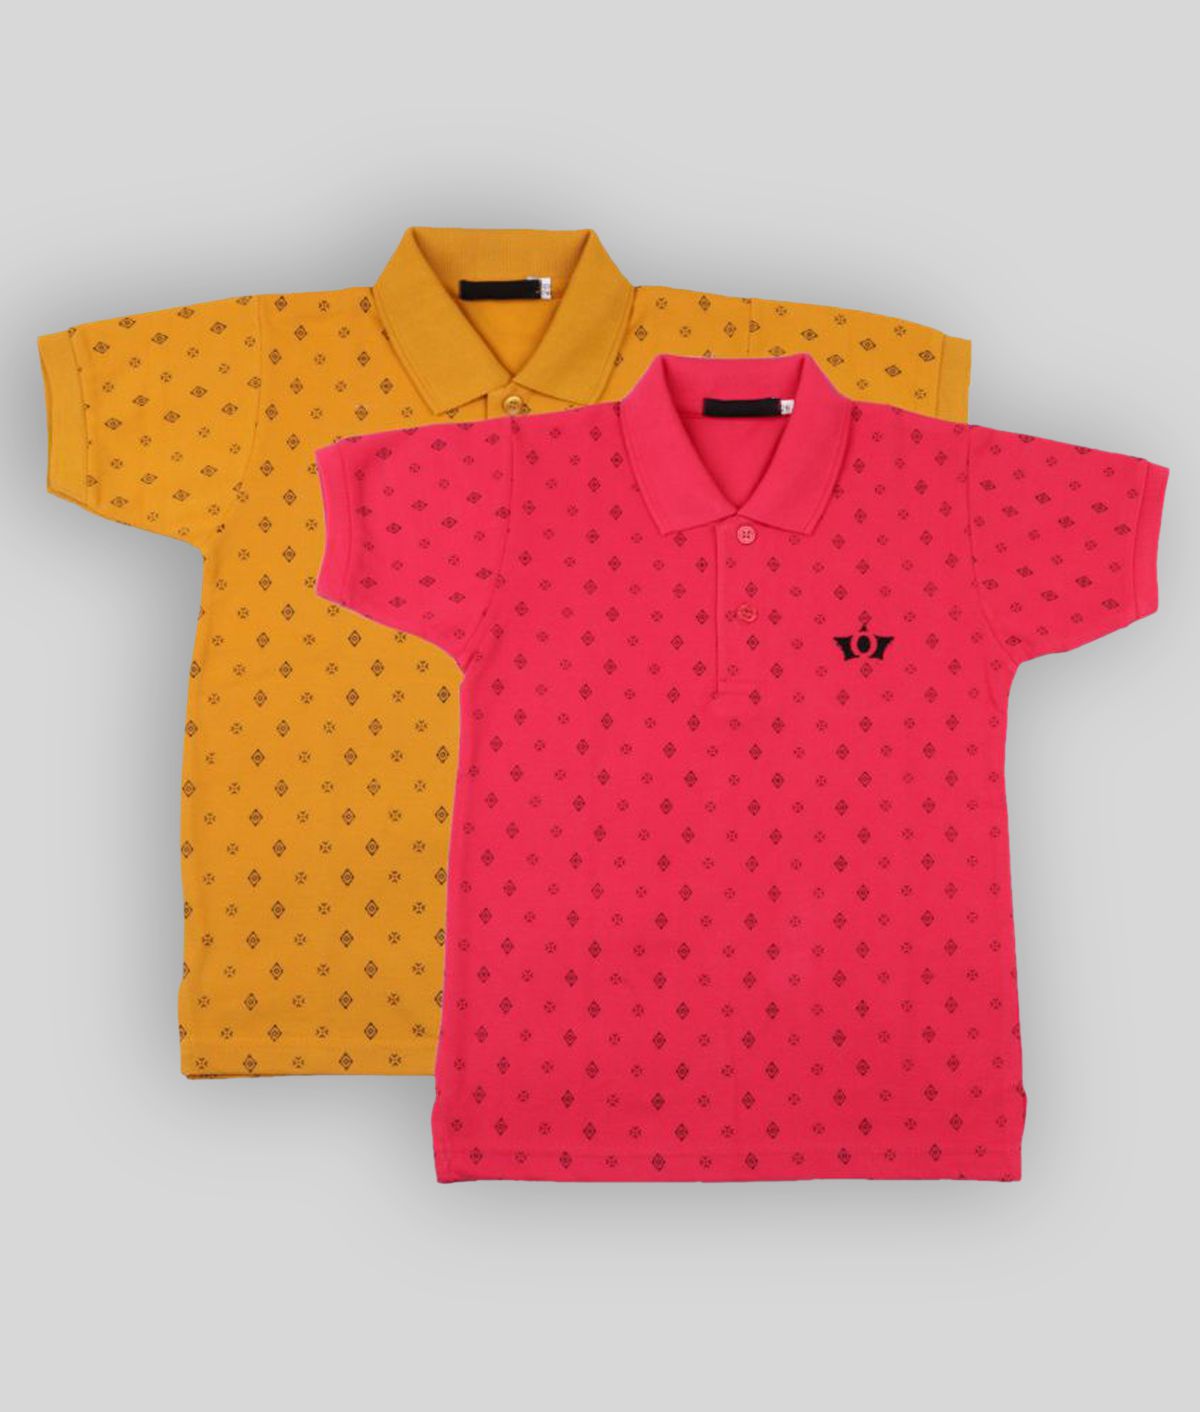     			Neuvin Pink and Yellow Printed Cotton Polo T Shirts for Boys Pack of 2